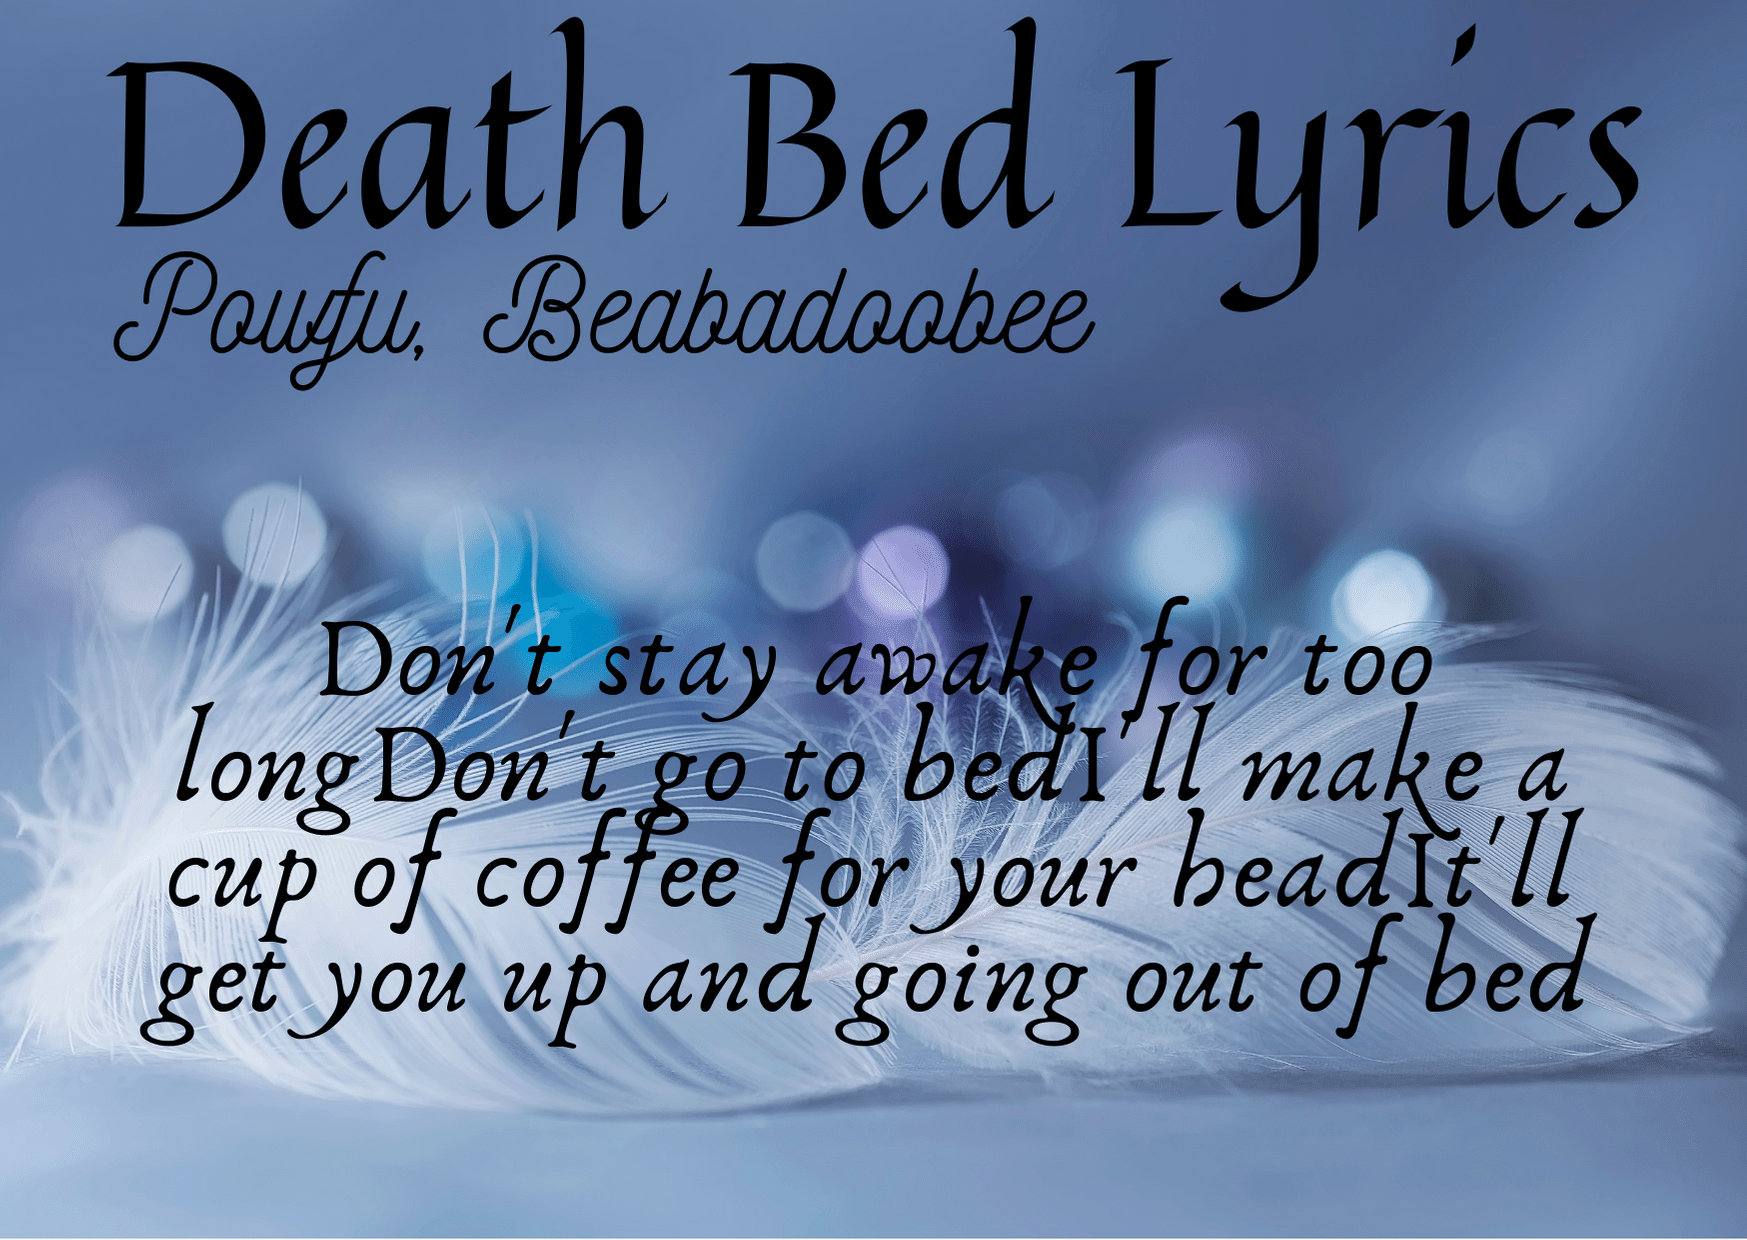 Powfu, Beabadoobee Death Bed Lyrics Death Bed Lyrics "Death Bed (Coffee for Your Head)", originally titled "Death Bed" is a song by Canadian musician Powfu, featuring Filipino-British singer-songwriter Beabadoobee. The song was initially uploaded to SoundCloud and YouTube in 2019; following Powfu signing to Columbia Records, the song was released on streaming services on February 8, 2020. The song samples the 2017 song "Coffee" by Beabadoobee, who is credited as a featured artist. [su_youtube url="https://youtu.be/jJPMnTXl63E" autoplay="yes"] [su_heading]Death Bed Lyrics[/su_heading] Don't stay awake for too long Don't go to bed I'll make a cup of coffee for your head It'll get you up and going out of bed Yeah... I don't wanna fall asleep, I don't wanna pass away I been thinking of our future cause I'll never see those days I don't know why this has happened, but I probably deserve it I tried to do my best, but you know that I'm not perfect I been praying for forgiveness, you been praying for my health When I leave this earth, hoping you'll find someone else Cause yeah, we still young there's so much we haven't done Getting married, start a family, watch your husband with his son I wish it could be me, but I won't make it off this bed I hope I go to heaven, so I see you once again My life was kinda short, but I got so many blessings Happy you were mine, it sucks that it's all ending Don't stay awake for too long Don't go to bed I'll make a cup of coffee for your head It'll get you up and going out of bed And I, don't stay awake for too long Don't go to bed I'll make a cup of coffee for your head It'll get you up and going out of bed I'm happy that you're here with me, I'm sorry if I tear up When me and you were younger you would always make me cheer up Taking goofy videos while walking through the park You would jump into my arms every time you heard a bark Cuddle in your sheets, sang me sound asleep And sneak out through your kitchen at exactly 1:03 Sundays went to church, on Mondays watched a movie Soon you'll be alone, sorry that you have to lose me Don't stay awake for too long Don't go to bed I'll make a cup of coffee for your head It'll get you up and going out of bed And I, don't stay awake for too long Don't go to bed I'll make a cup of coffee for your head It'll get you up and going out of bed Don't stay awake for too long Don't go to bed I'll make a cup of coffee for your head It'll get you up and going out of bed And I, don't stay awake for too long Don't go to bed I'll make a cup of coffee for your head It'll get you up and going out of bed And I, don't stay awake for too long Don't go to bed I'll make a cup of coffee for your head It'll get you up and going out of bed